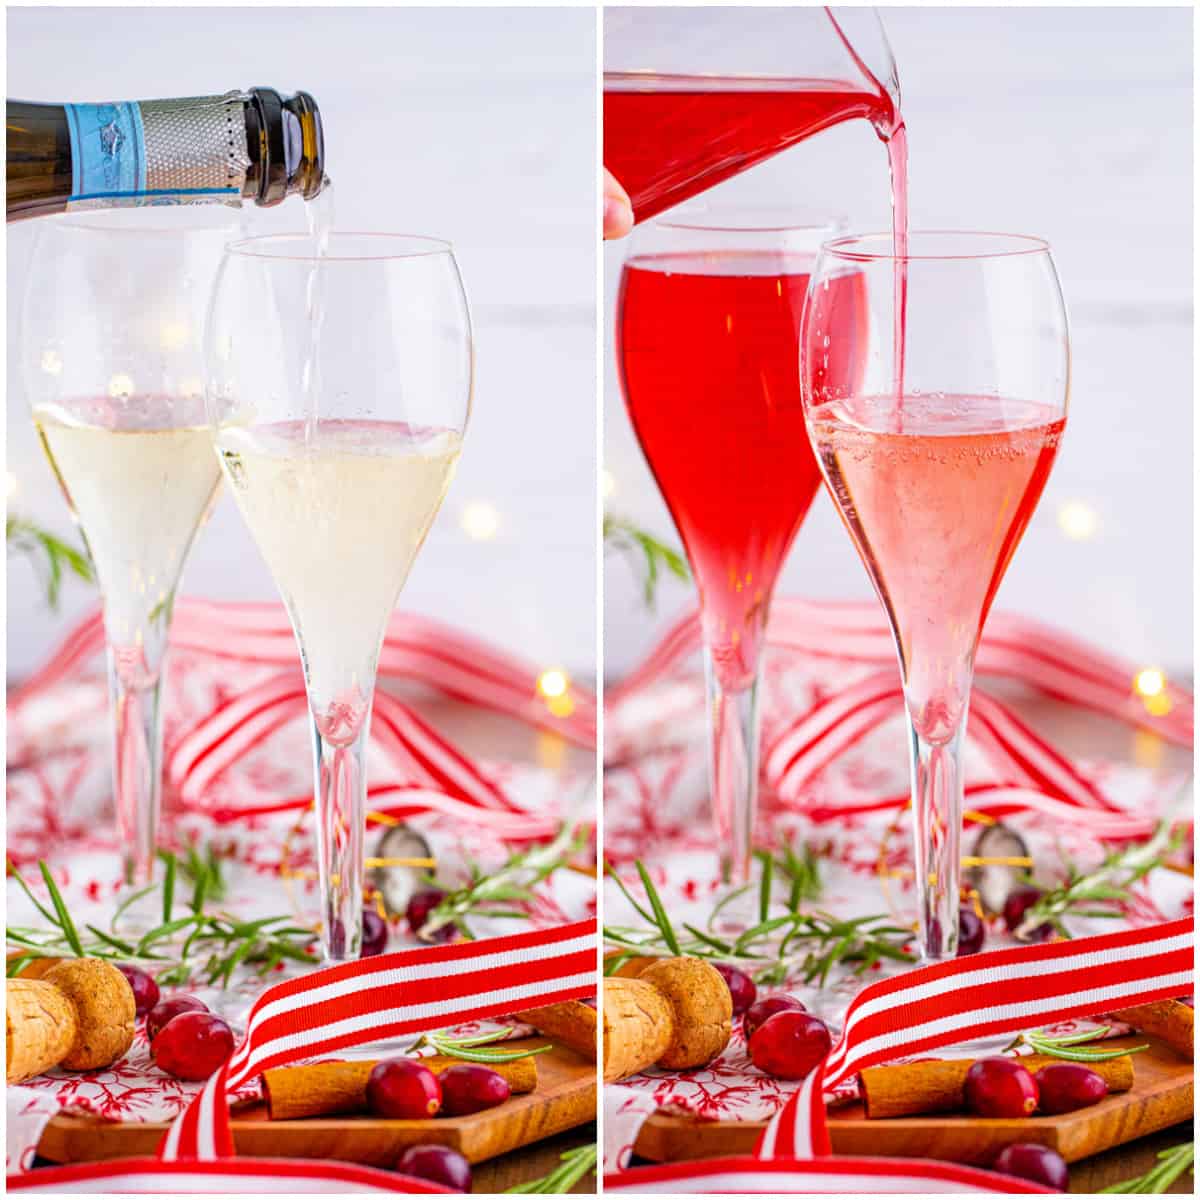 Step by step photos on how to make Christmas Mimosas.